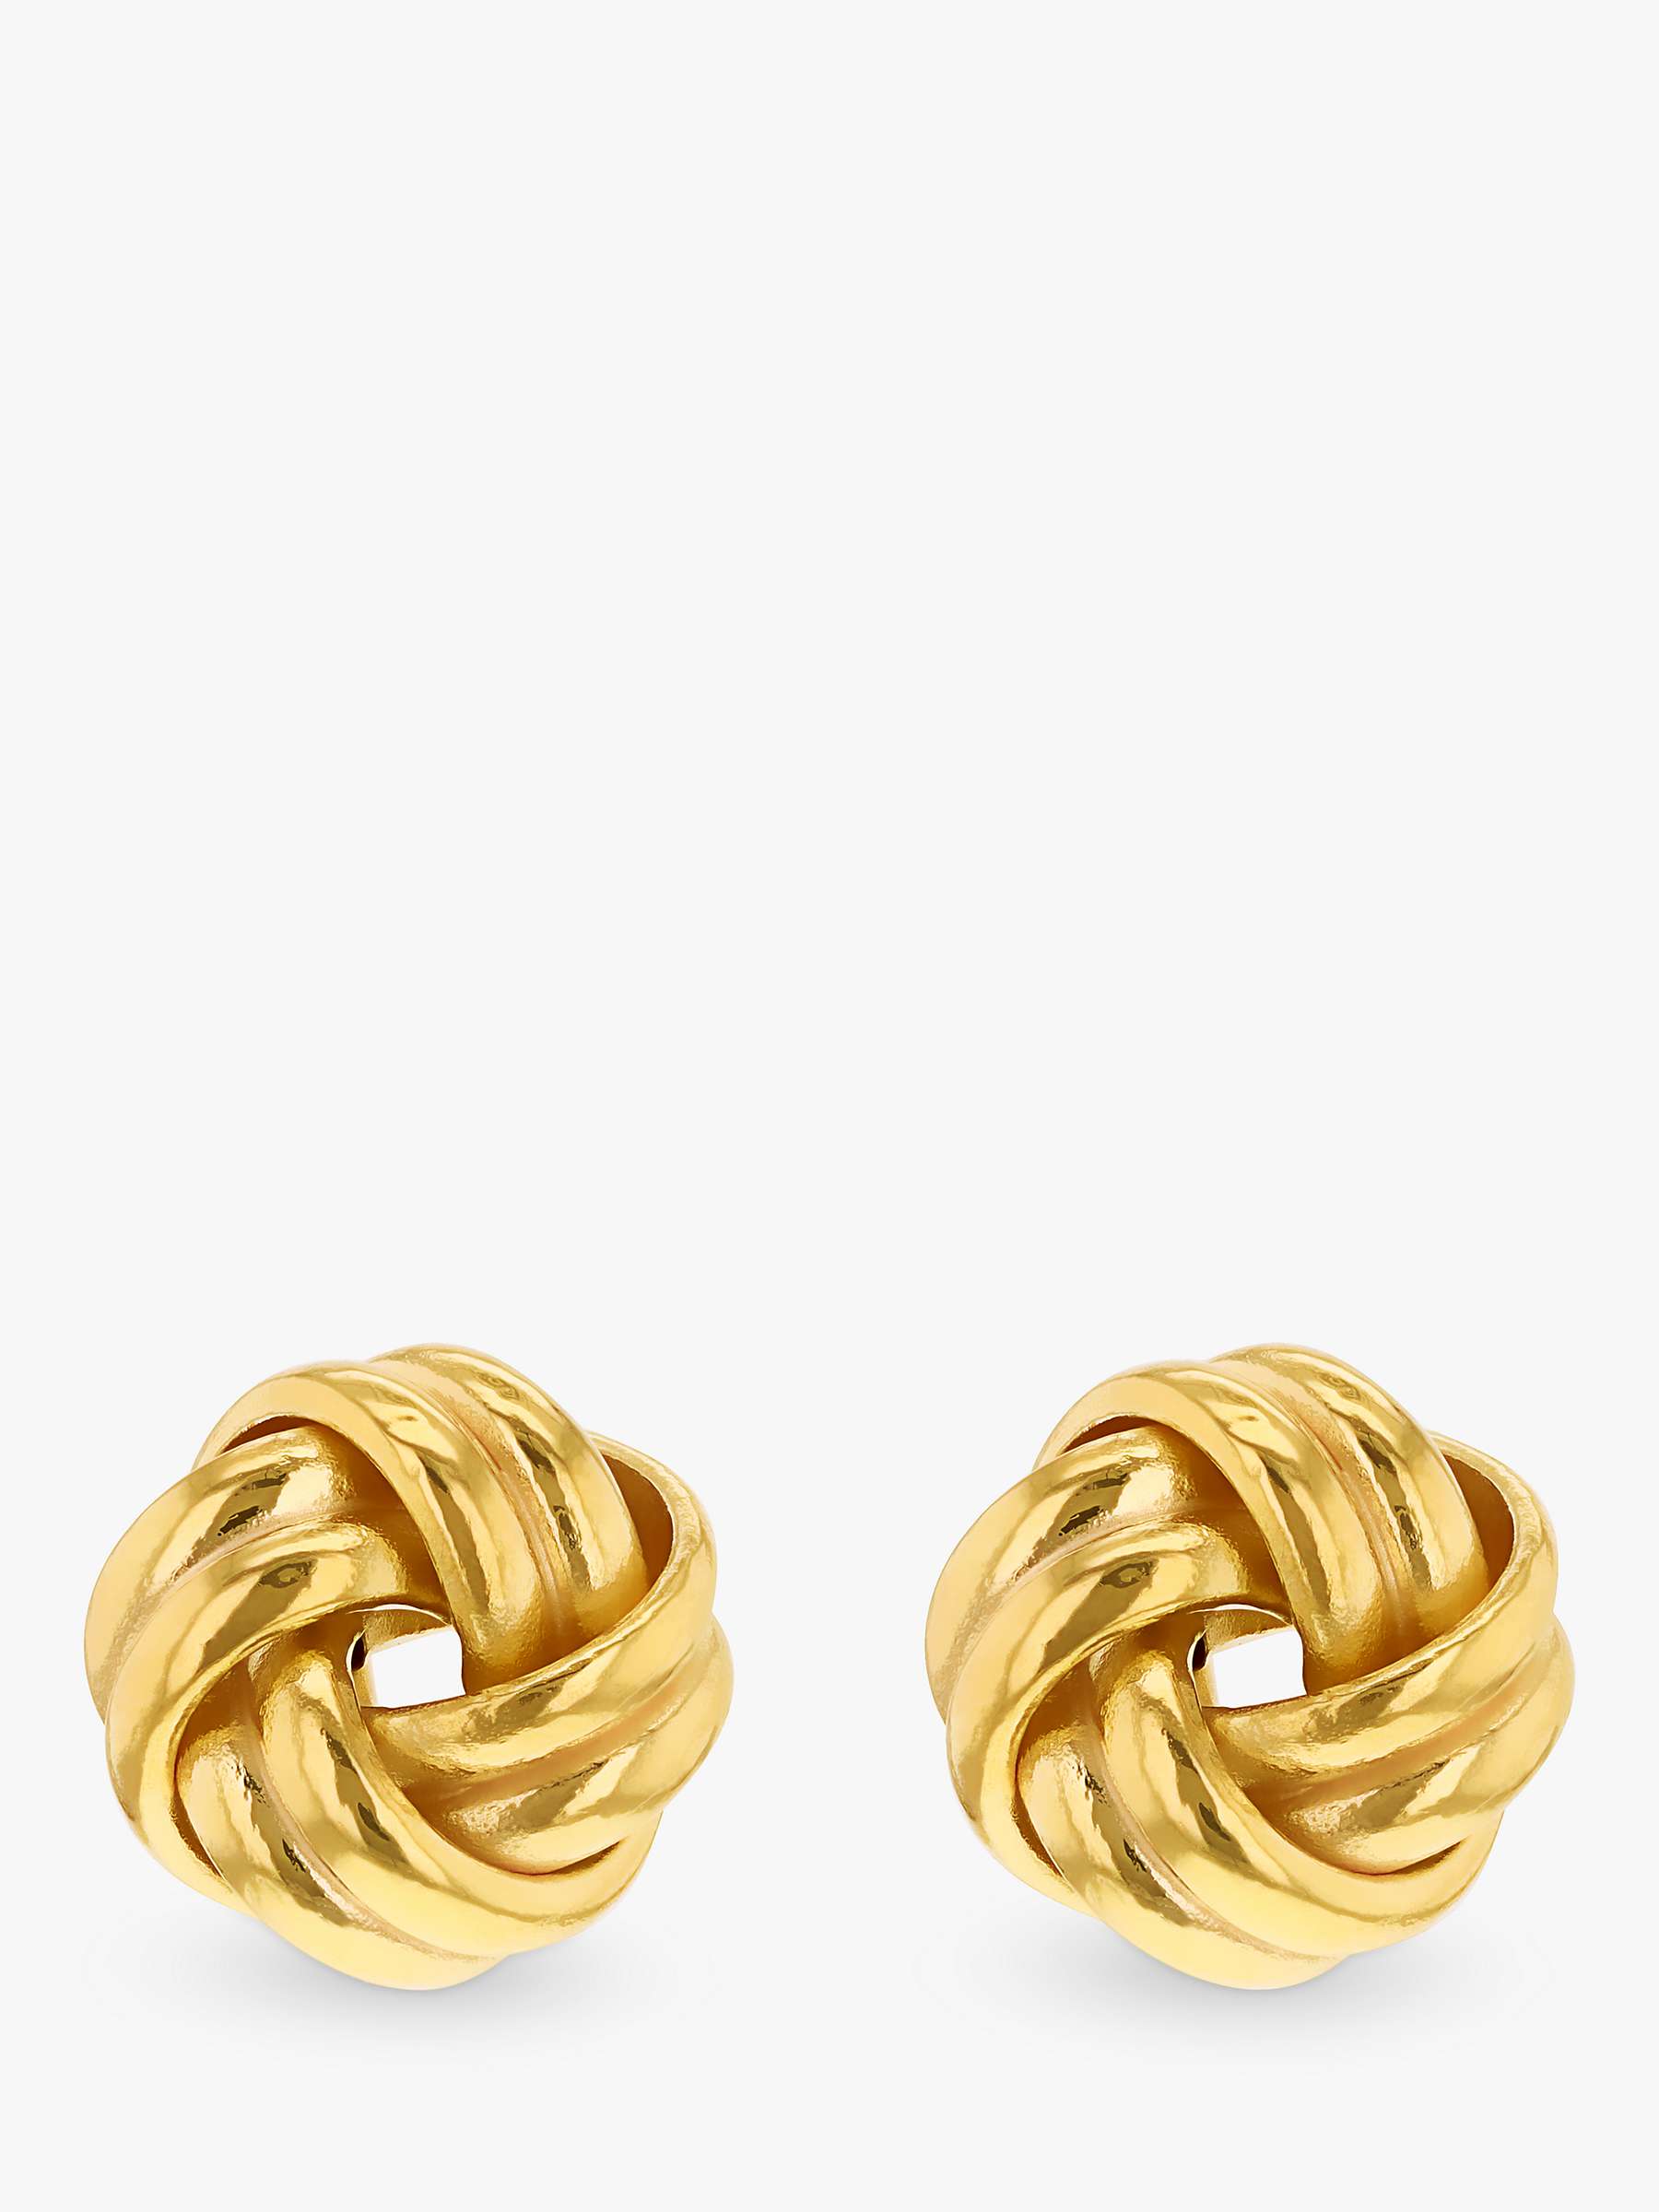 Buy IBB 18ct Yellow Gold Knot Stud Earrings, Yellow Gold Online at johnlewis.com